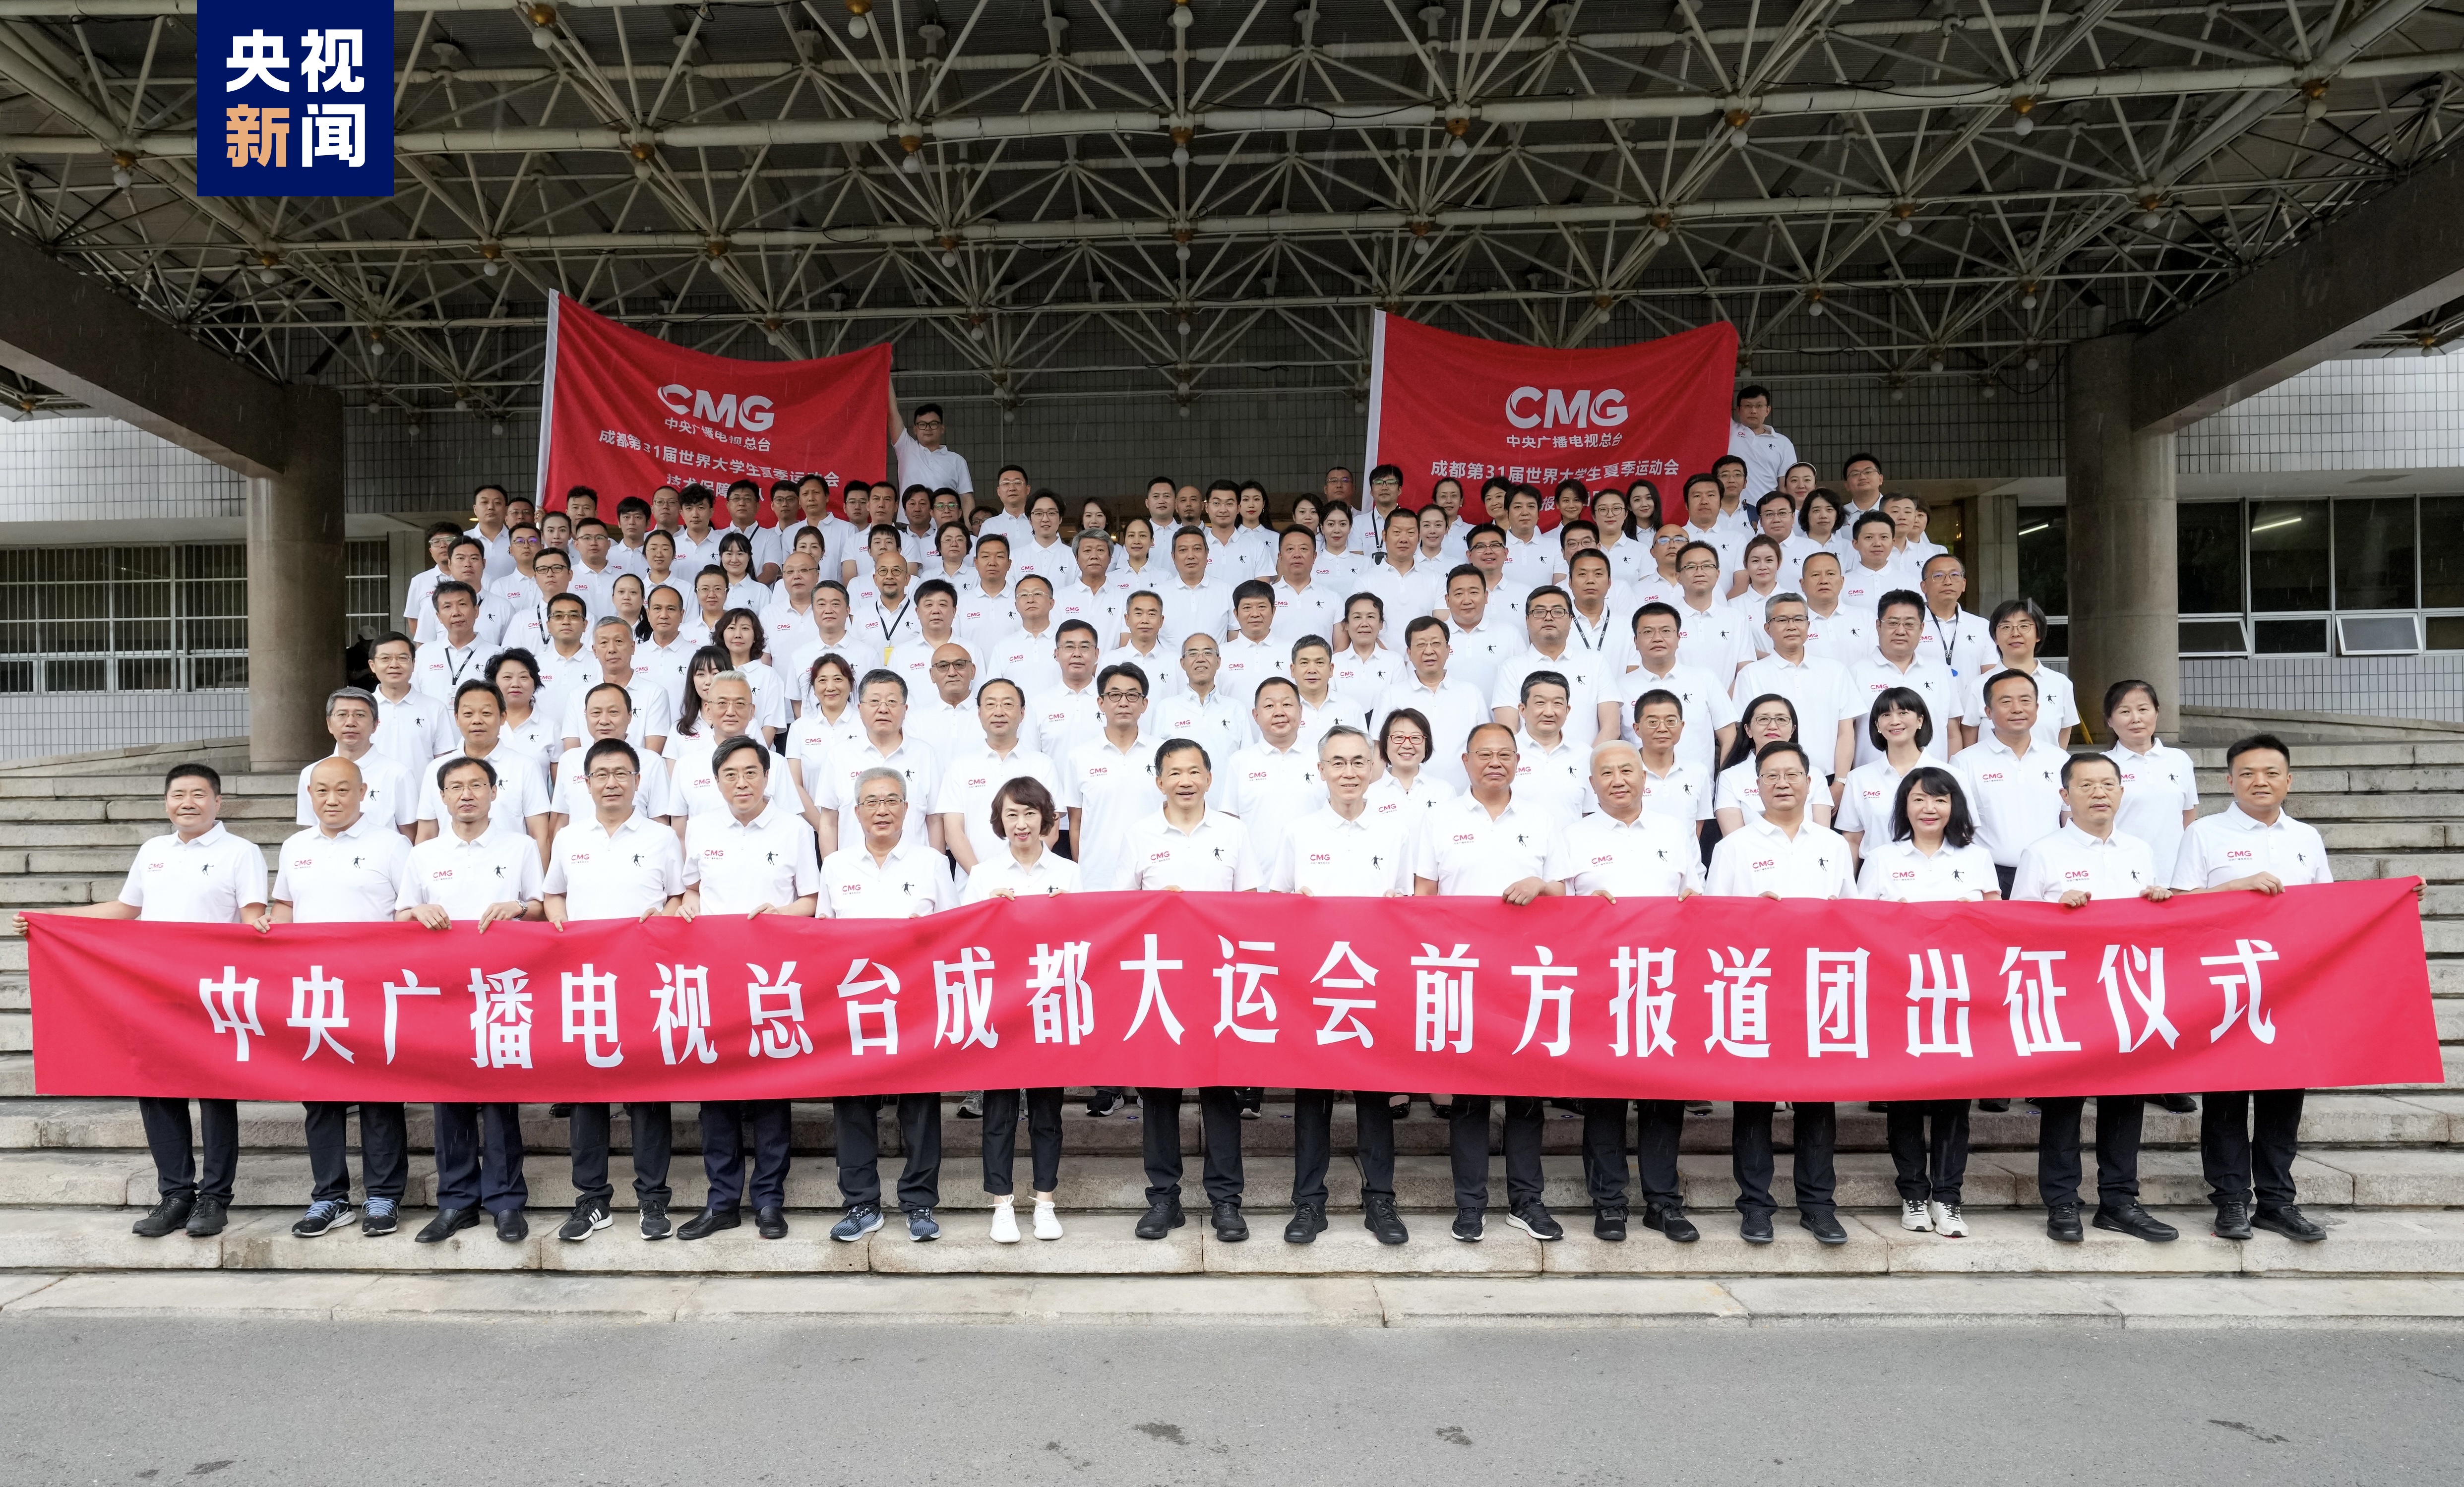 CMG President Shen Haixiong (center, front) and the reporting and broadcasting team for the Chengdu World University Games pose for a group photo in Beijing, China, July 12, 2023. /CMG